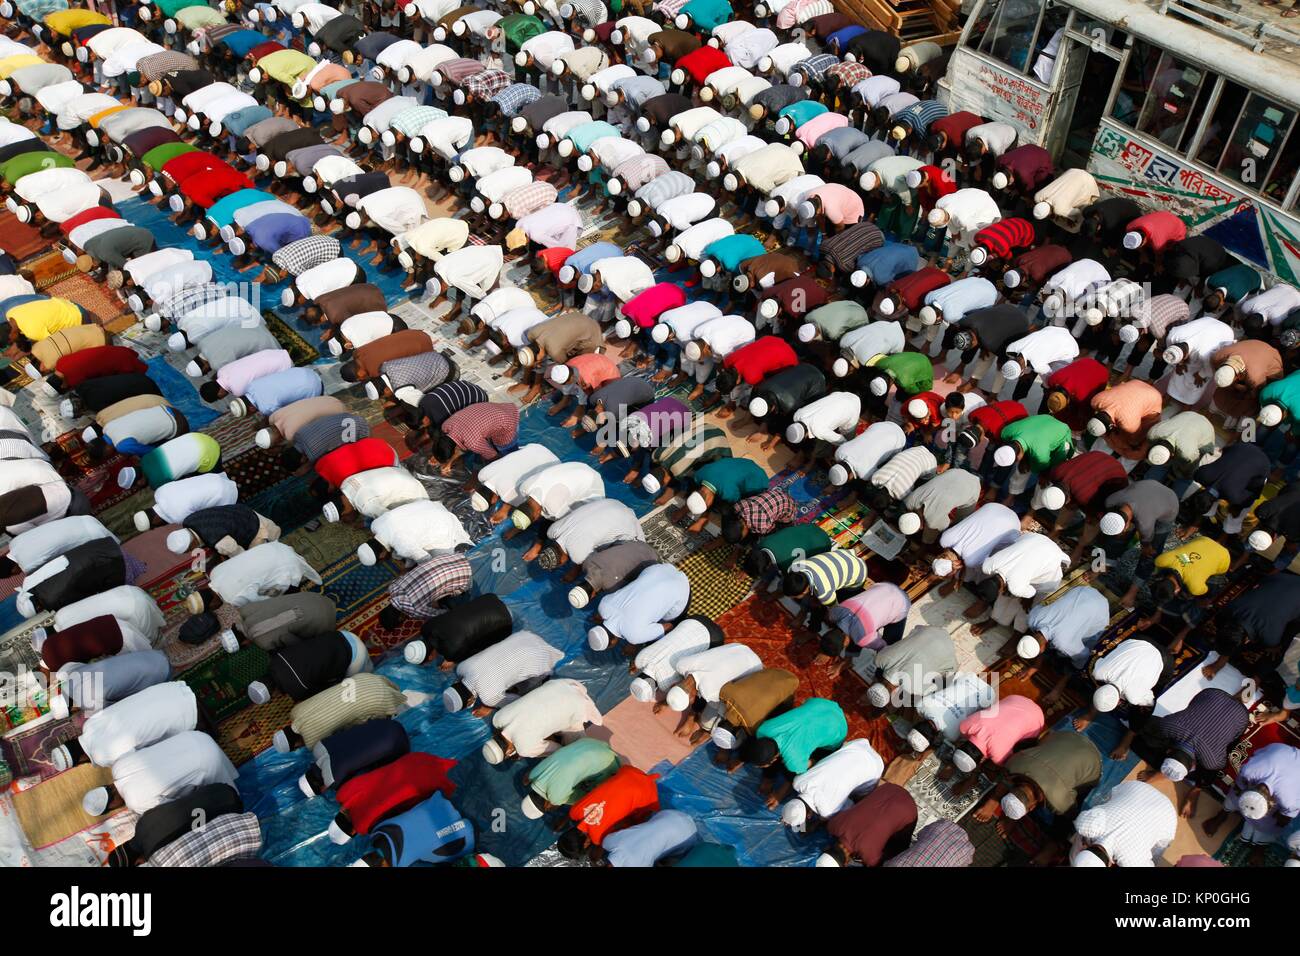 Muslim devotees offer Jumma prayers while attending the World Muslim Congregation, also known as Biswa Ijtema, at Tongi, on the outskirts of the Stock Photo